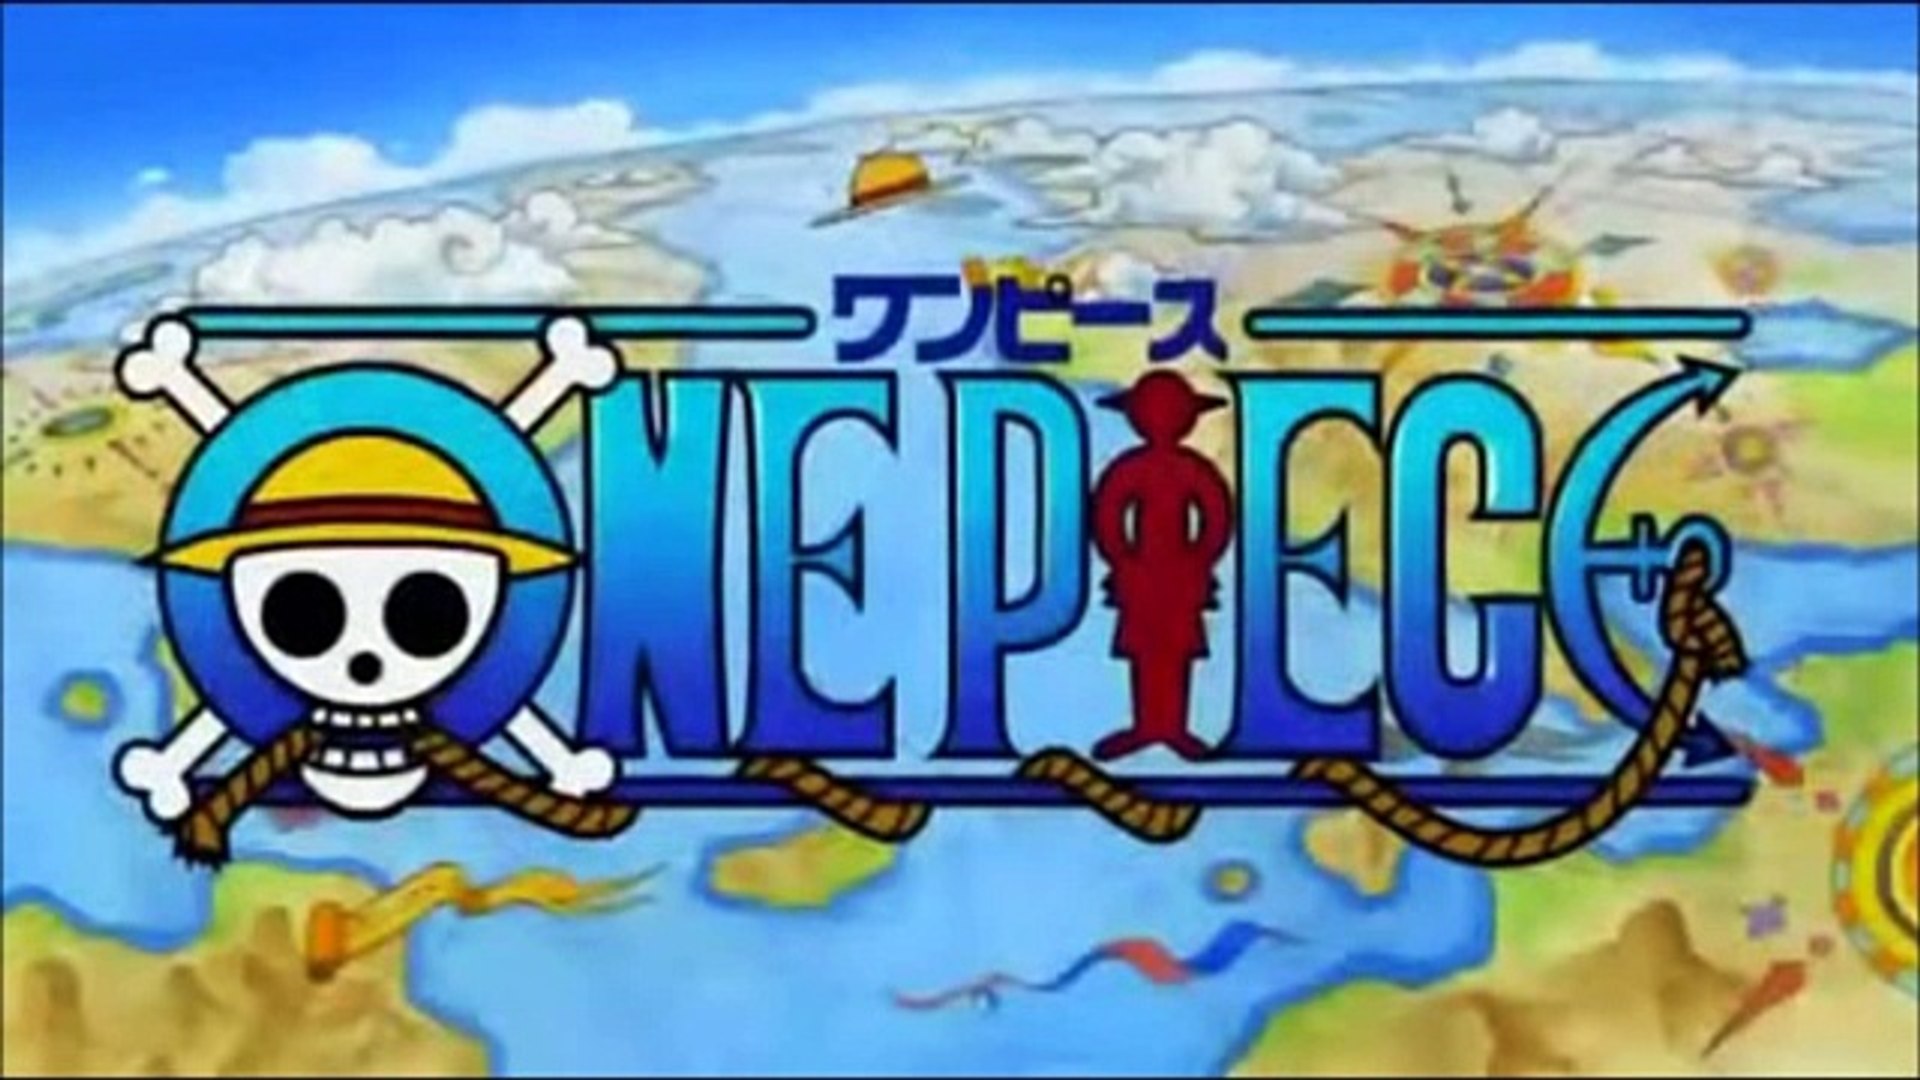 Stream One Piece Opening 1 We Are! W Lyrics (Complete Song